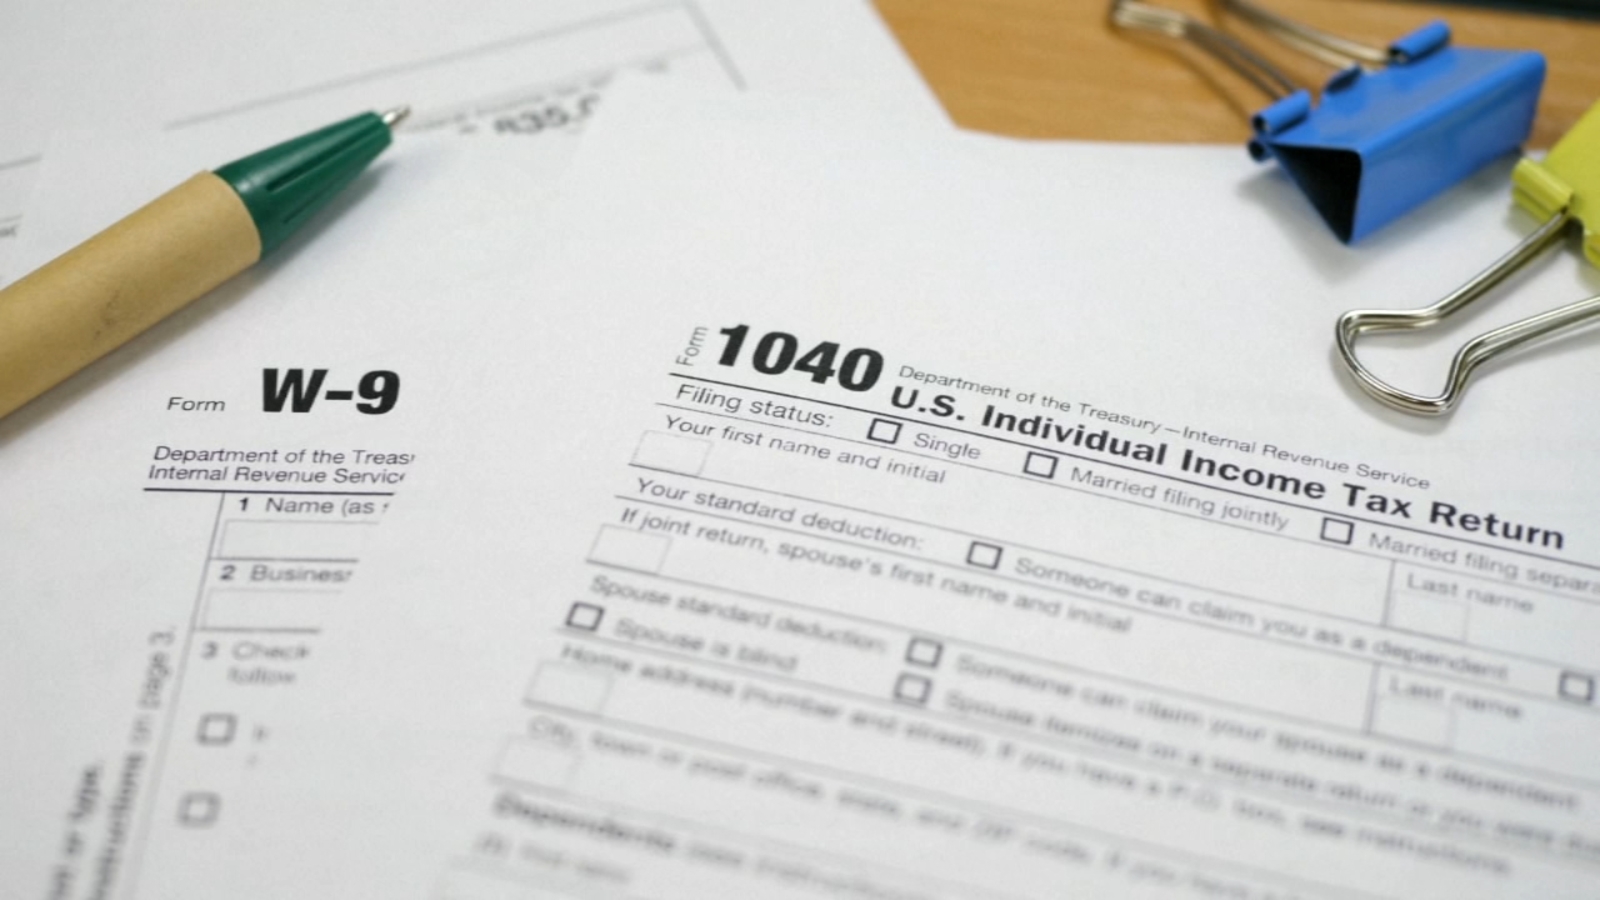 Tax tips: Getting started as deadline to file, request extension approaches [Video]